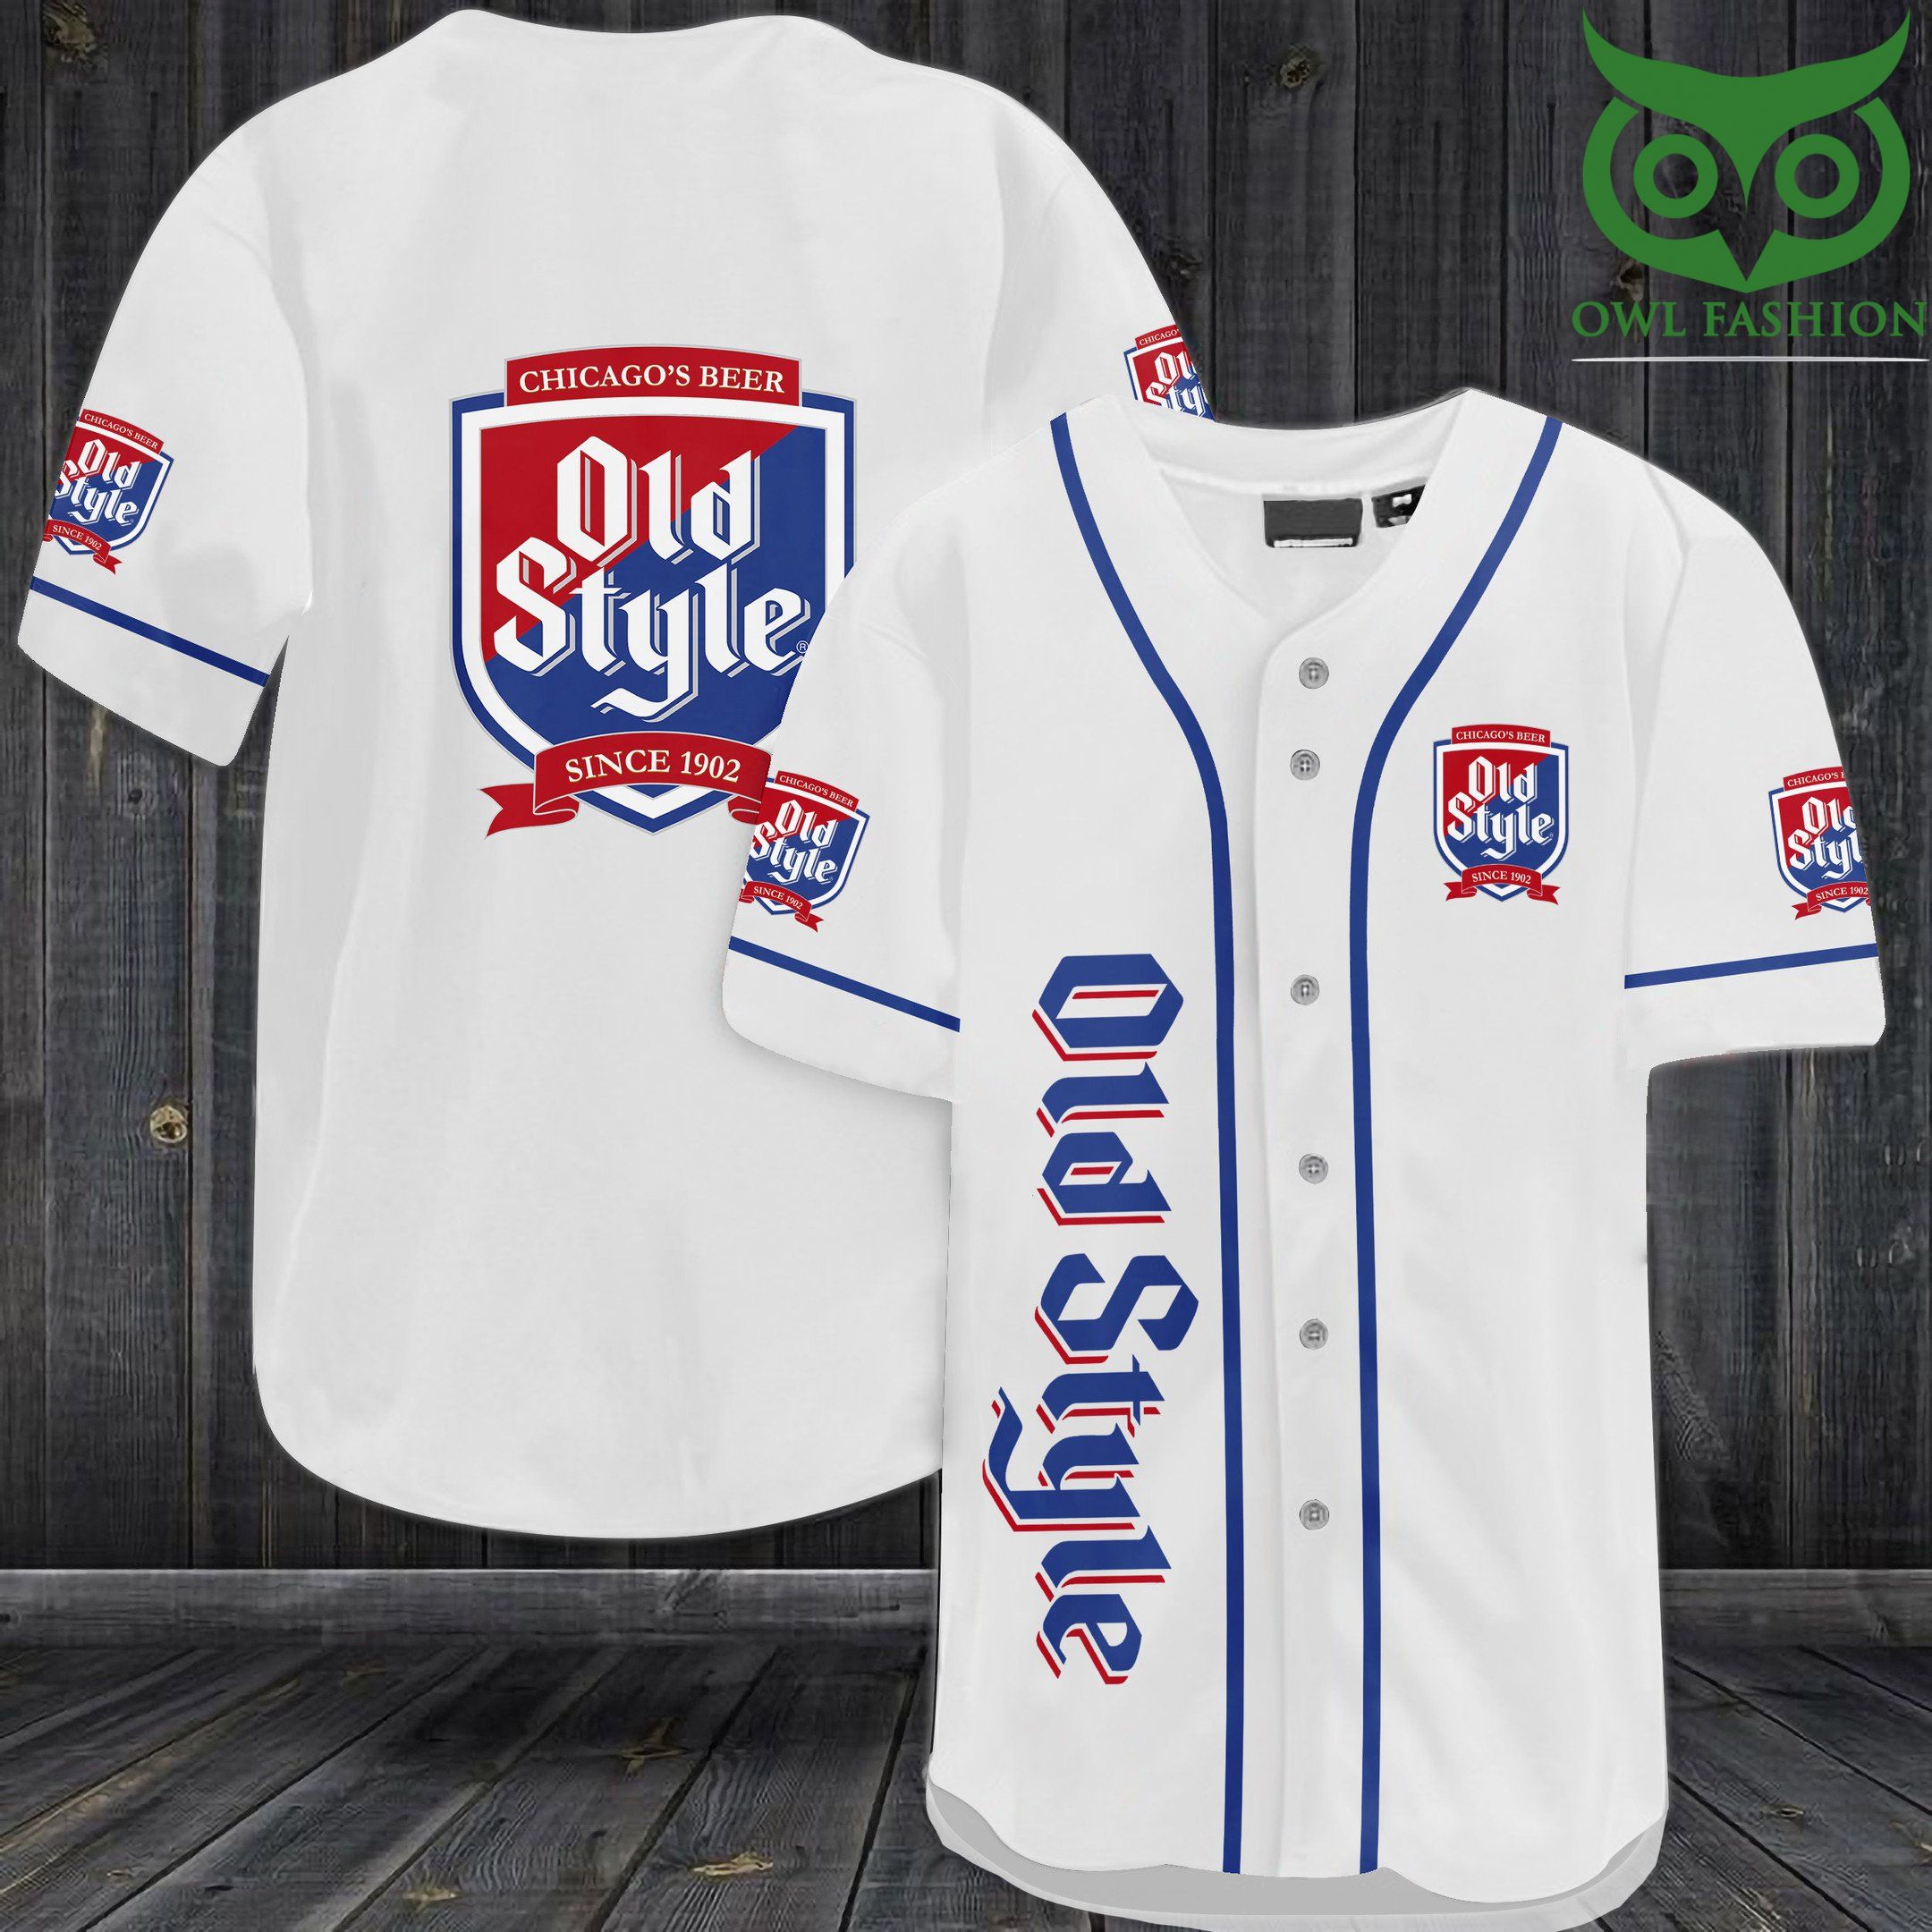 Old Style Chicago beer Baseball Jersey Shirt